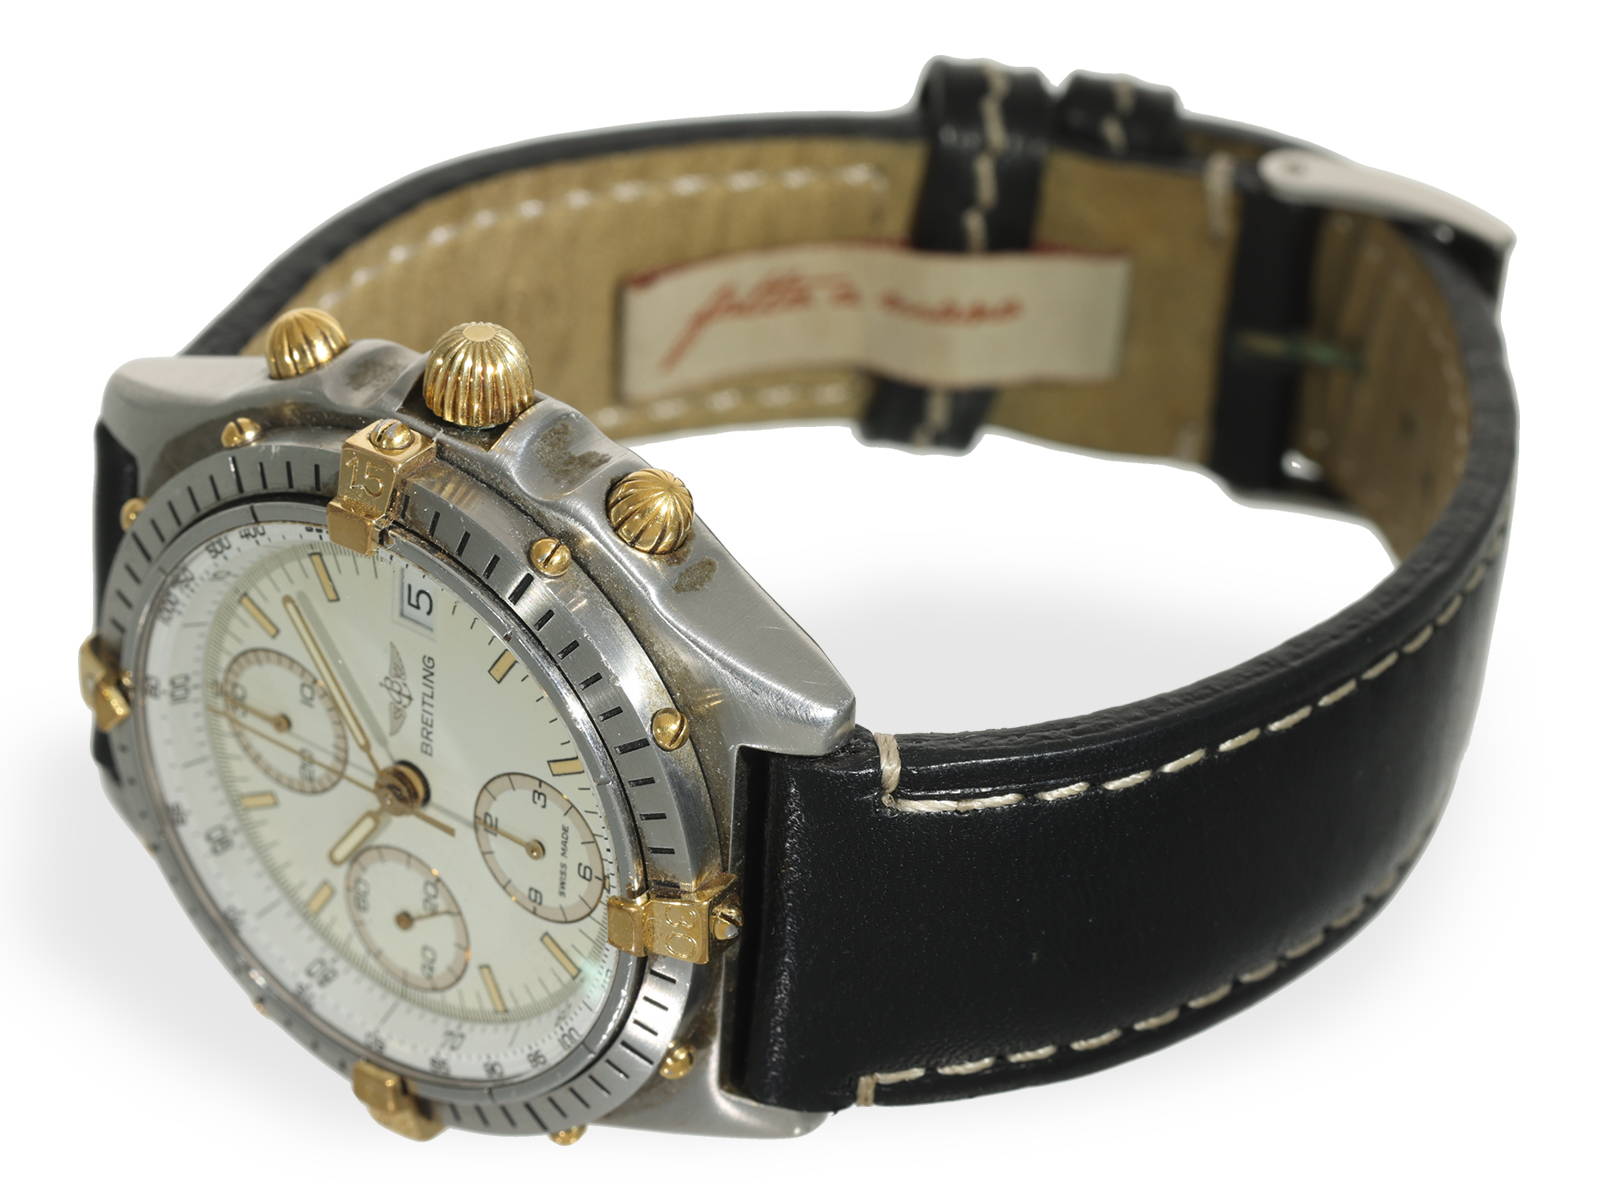 Wristwatch: sporty Breitling chronograph "Chronomat Ref. 81.950", steel/gold - Image 2 of 6